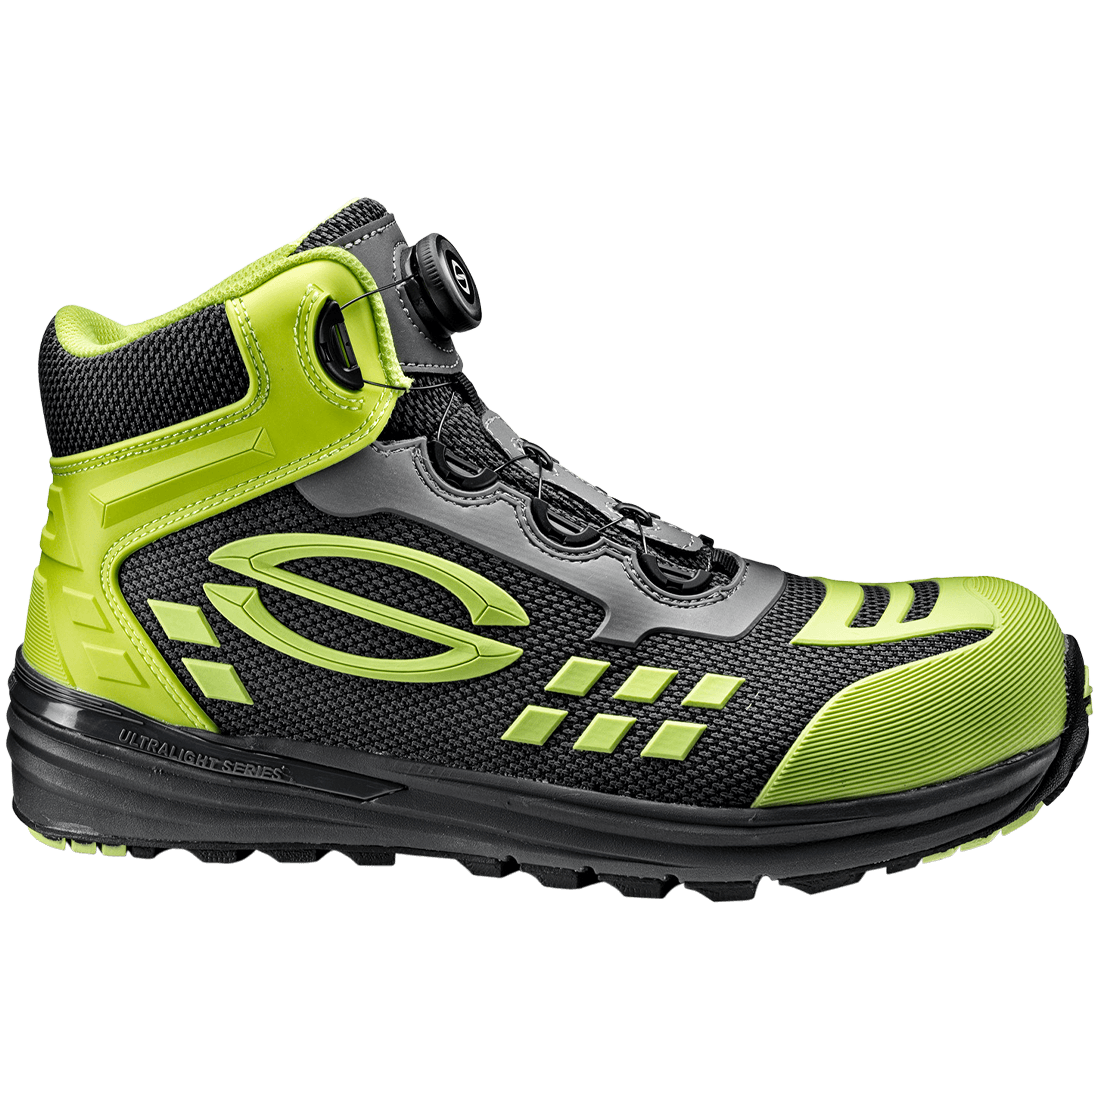 ULTRALIGHT LIME ARMOUR SHOE